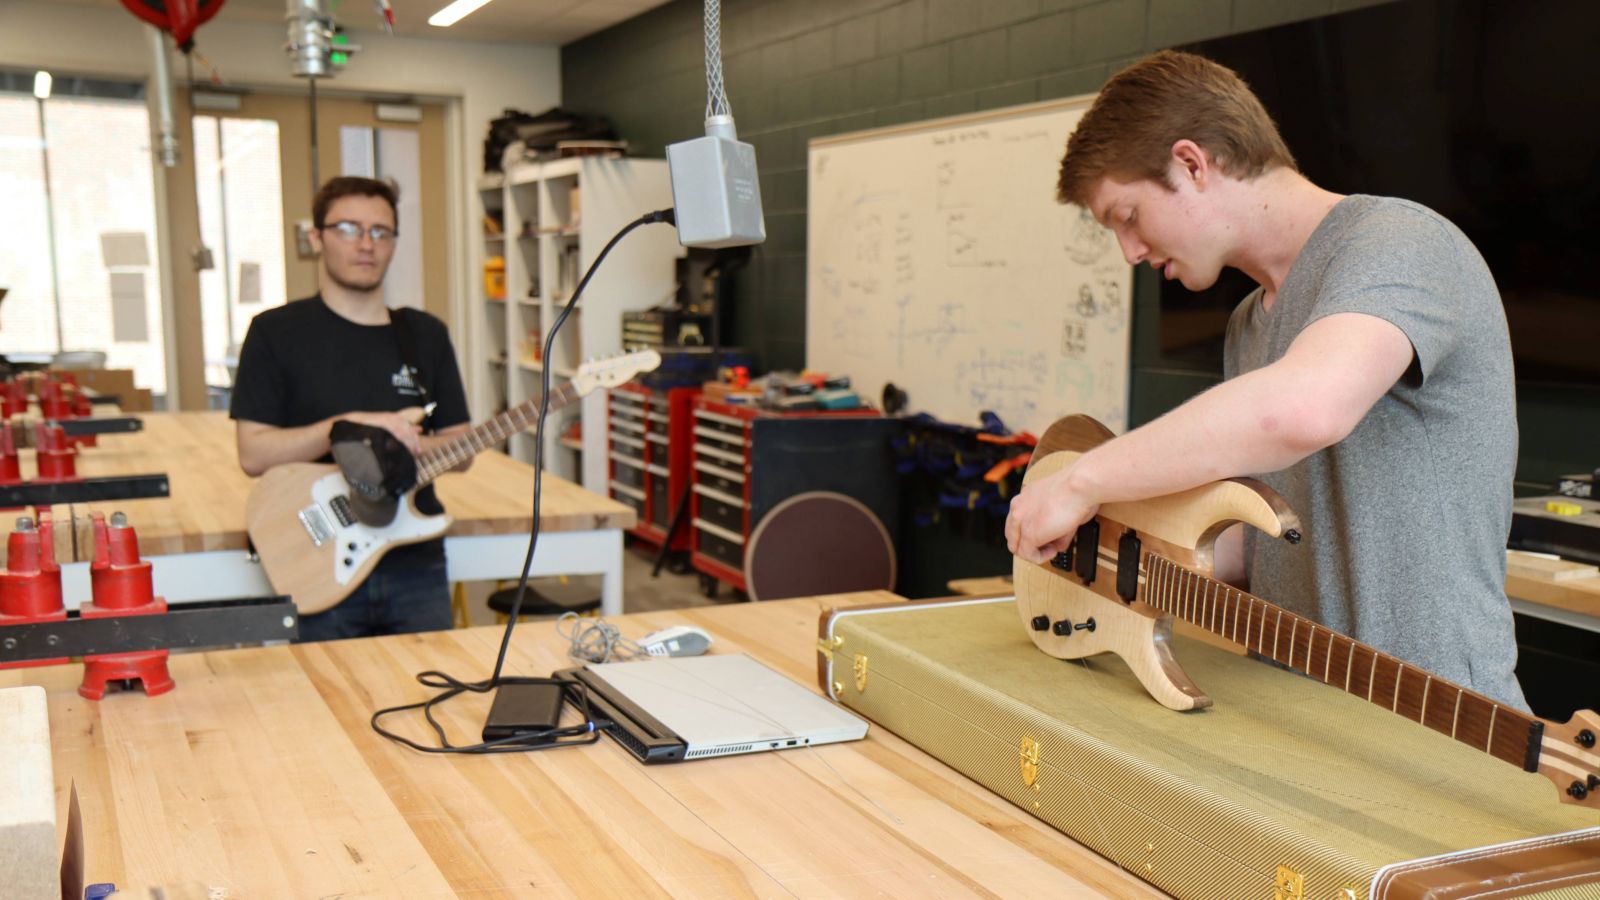 Ethan Fry (left) and Gryphon Mawhorter (right) discuss the details of Fry's guitar, built during Prof. Mark French's course.